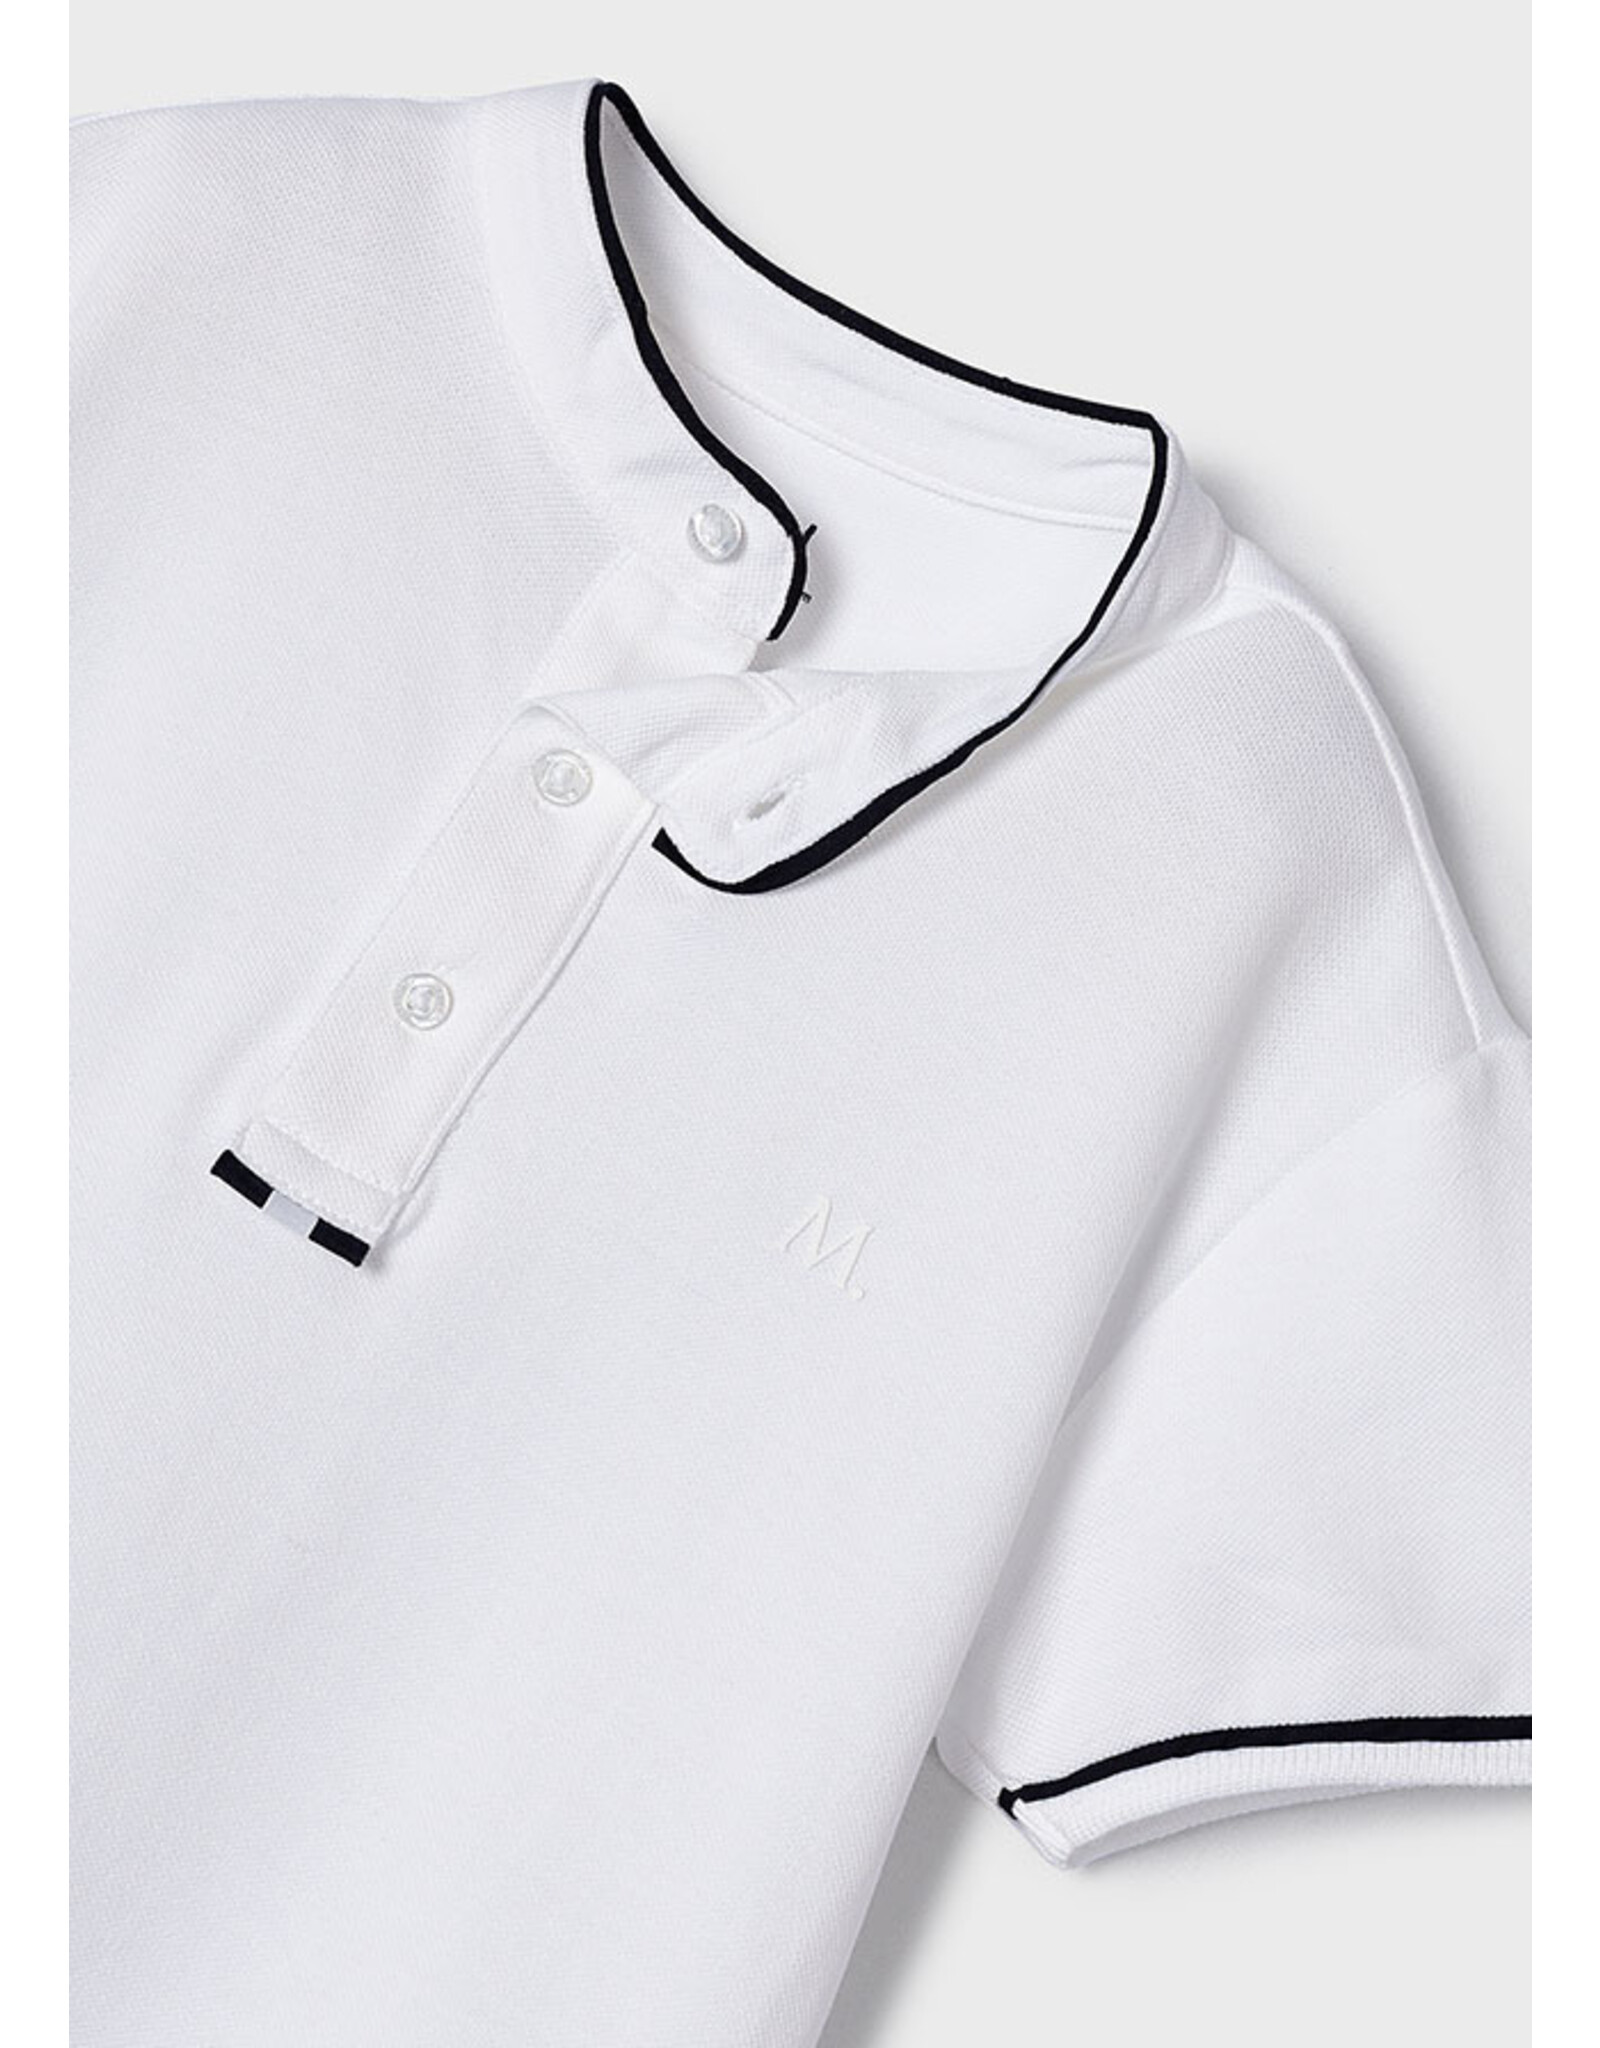 Mayoral Polos/smaoneck-White-3102-66